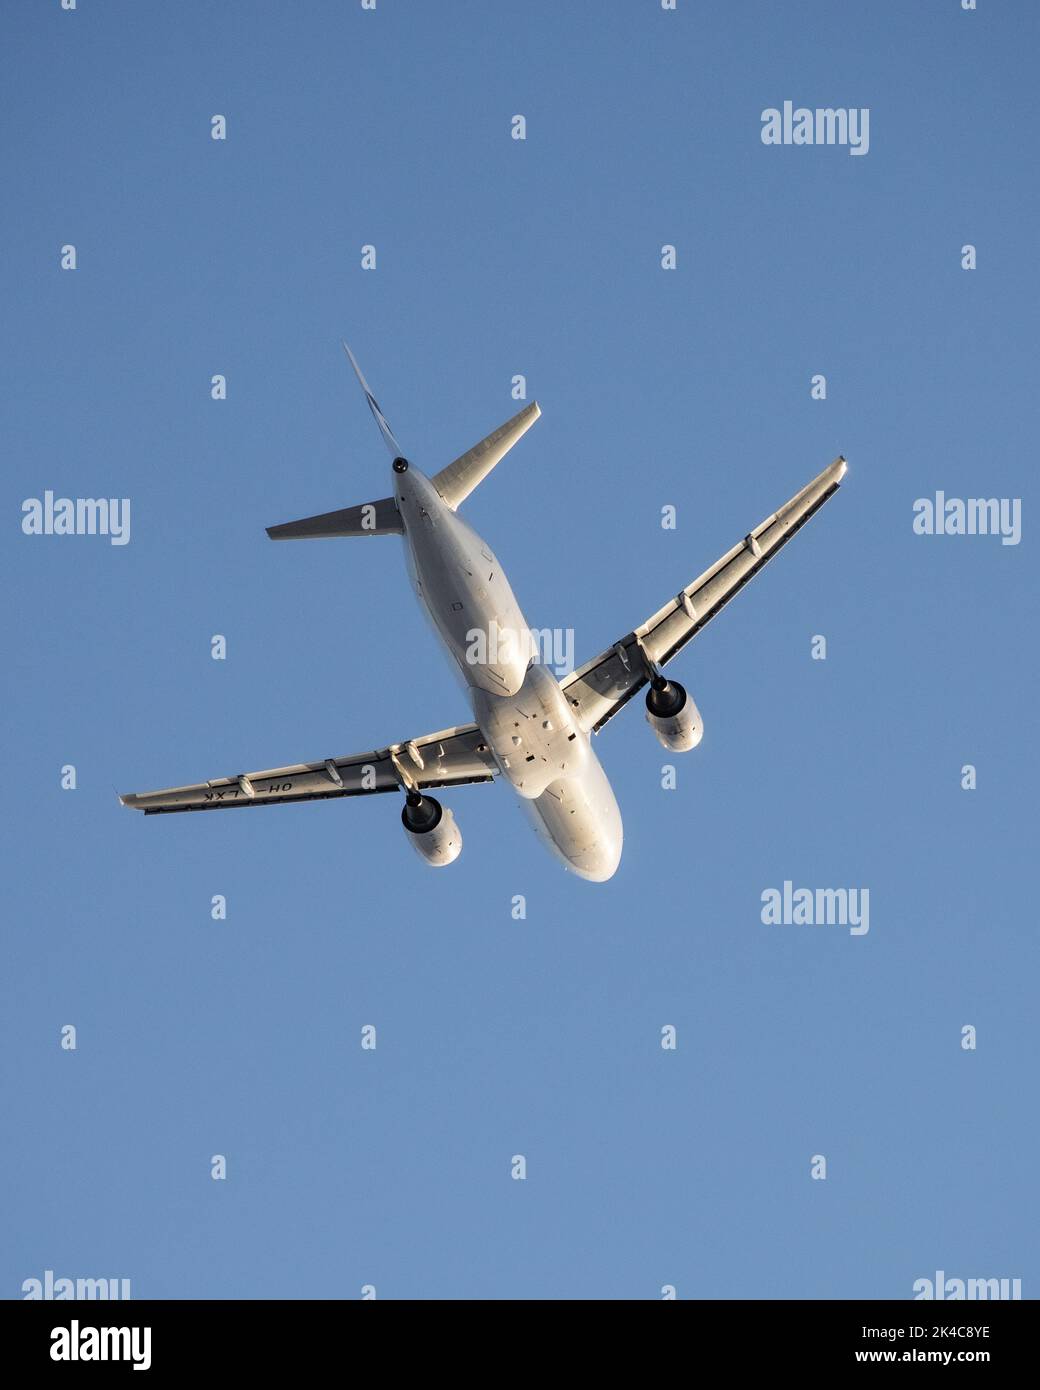 A low angle shot of white Finnair airplane in the blue sky Stock Photo